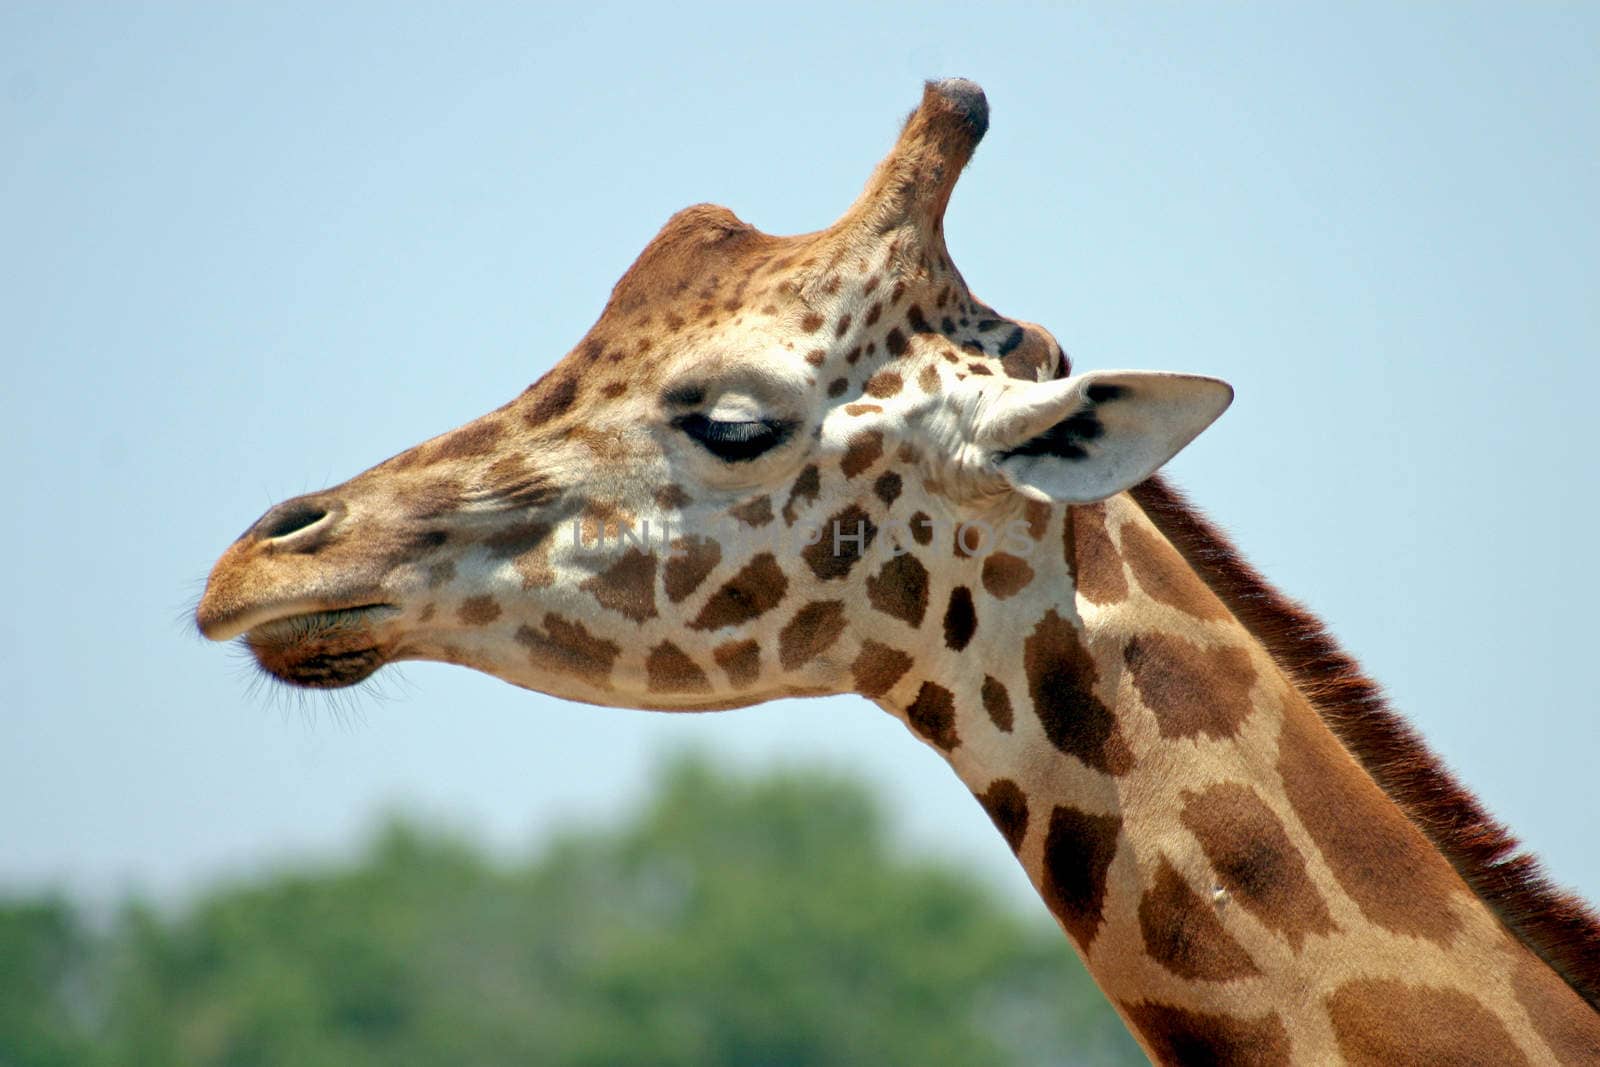 The head and neck of a giraffe